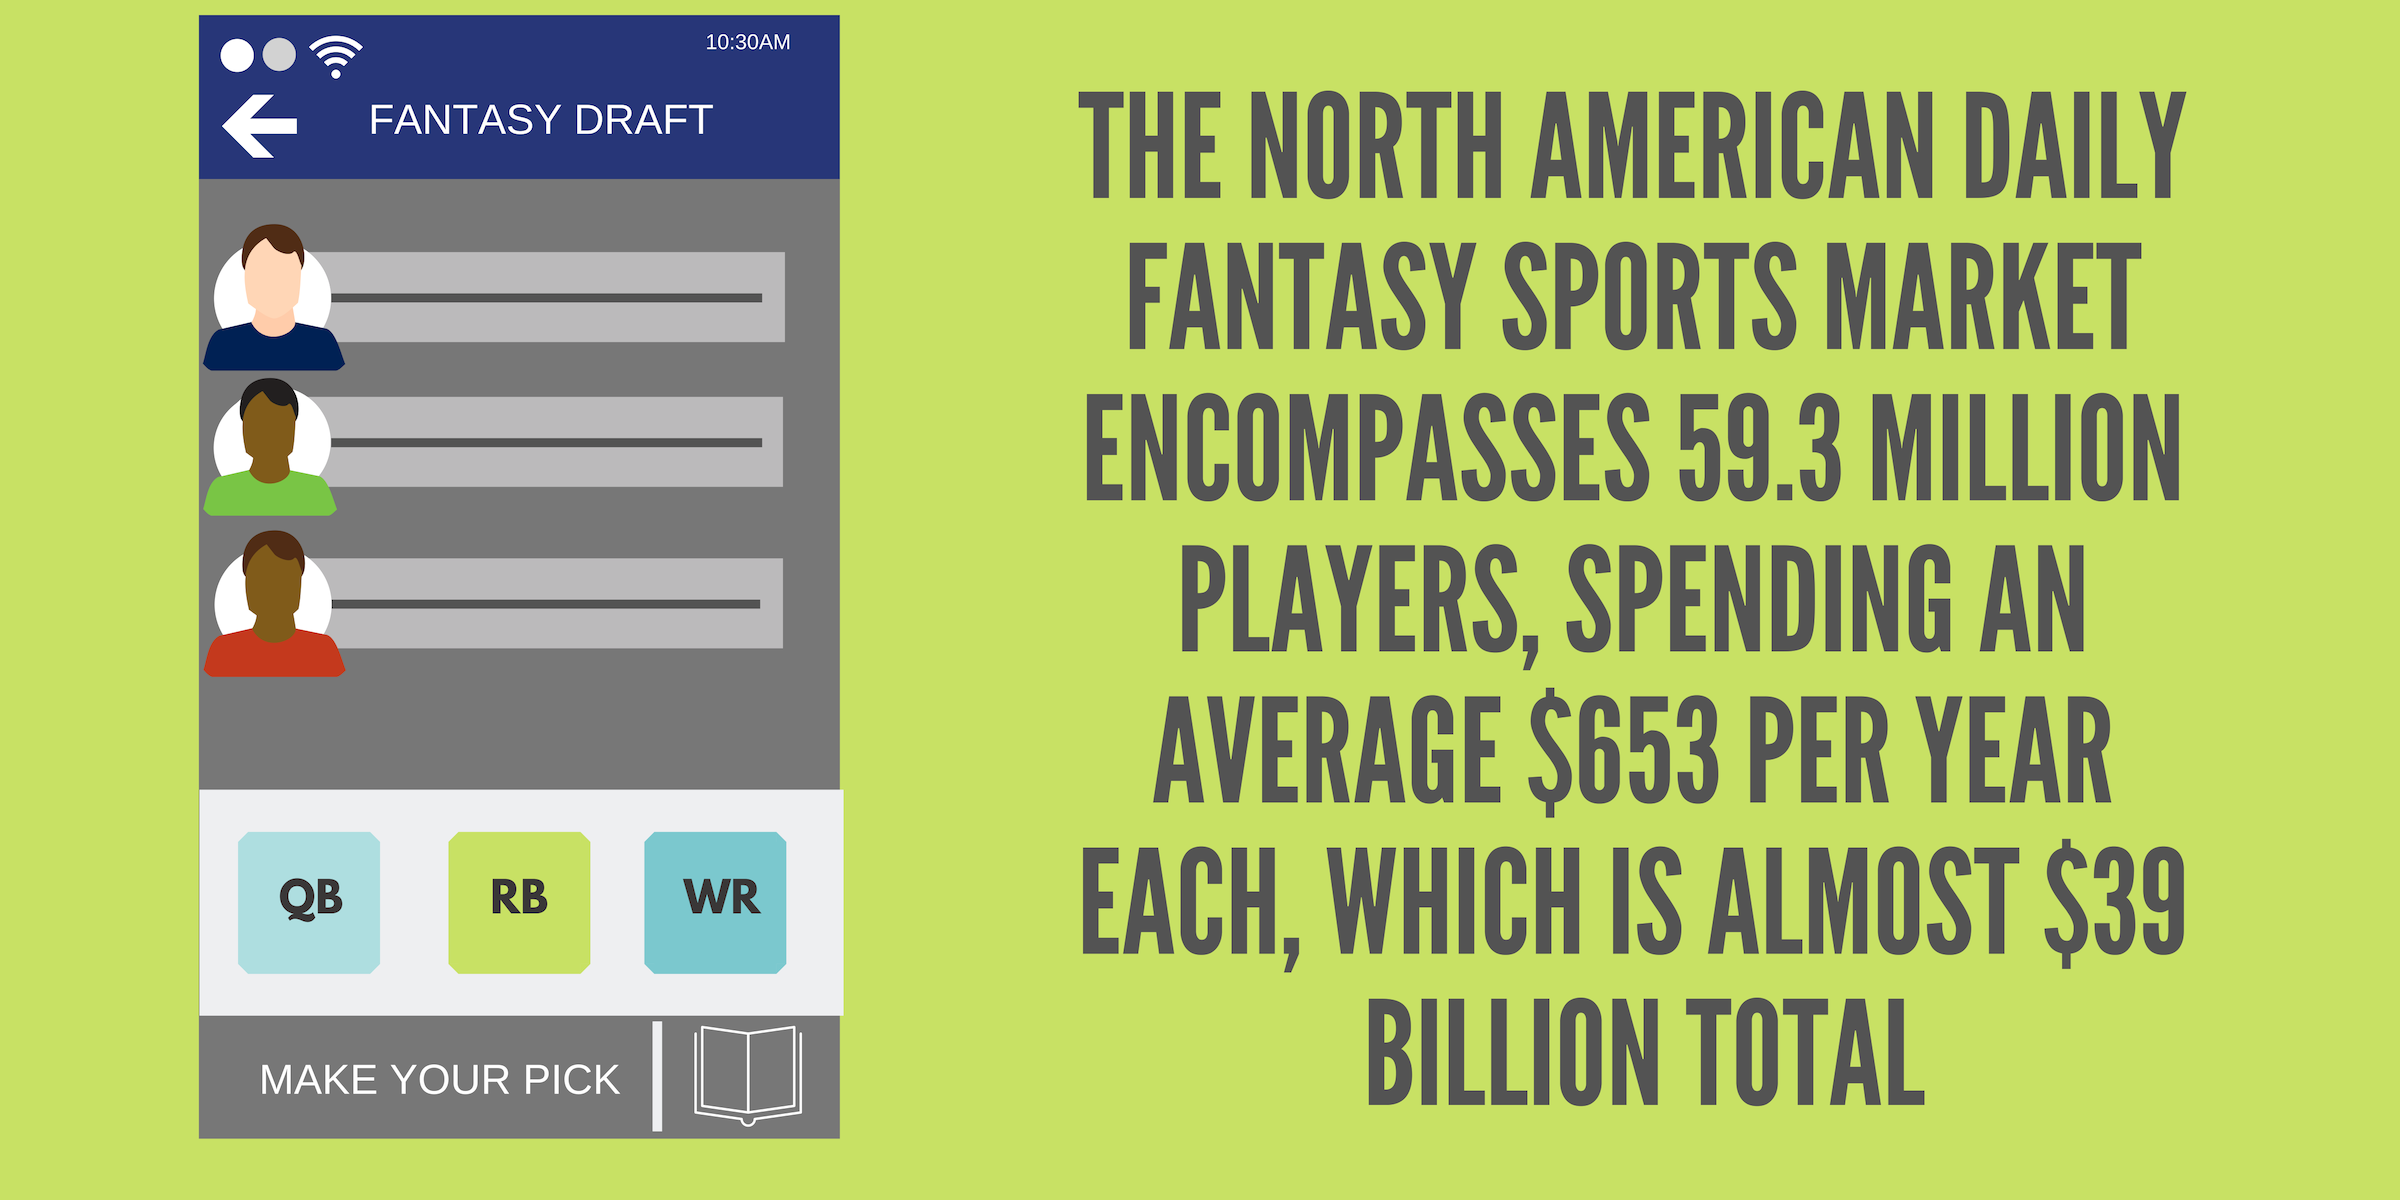 The North American daily fantasy sports market encompasses 59.3 million players, spending and average $653 per year each, which is almost $39 billion total.